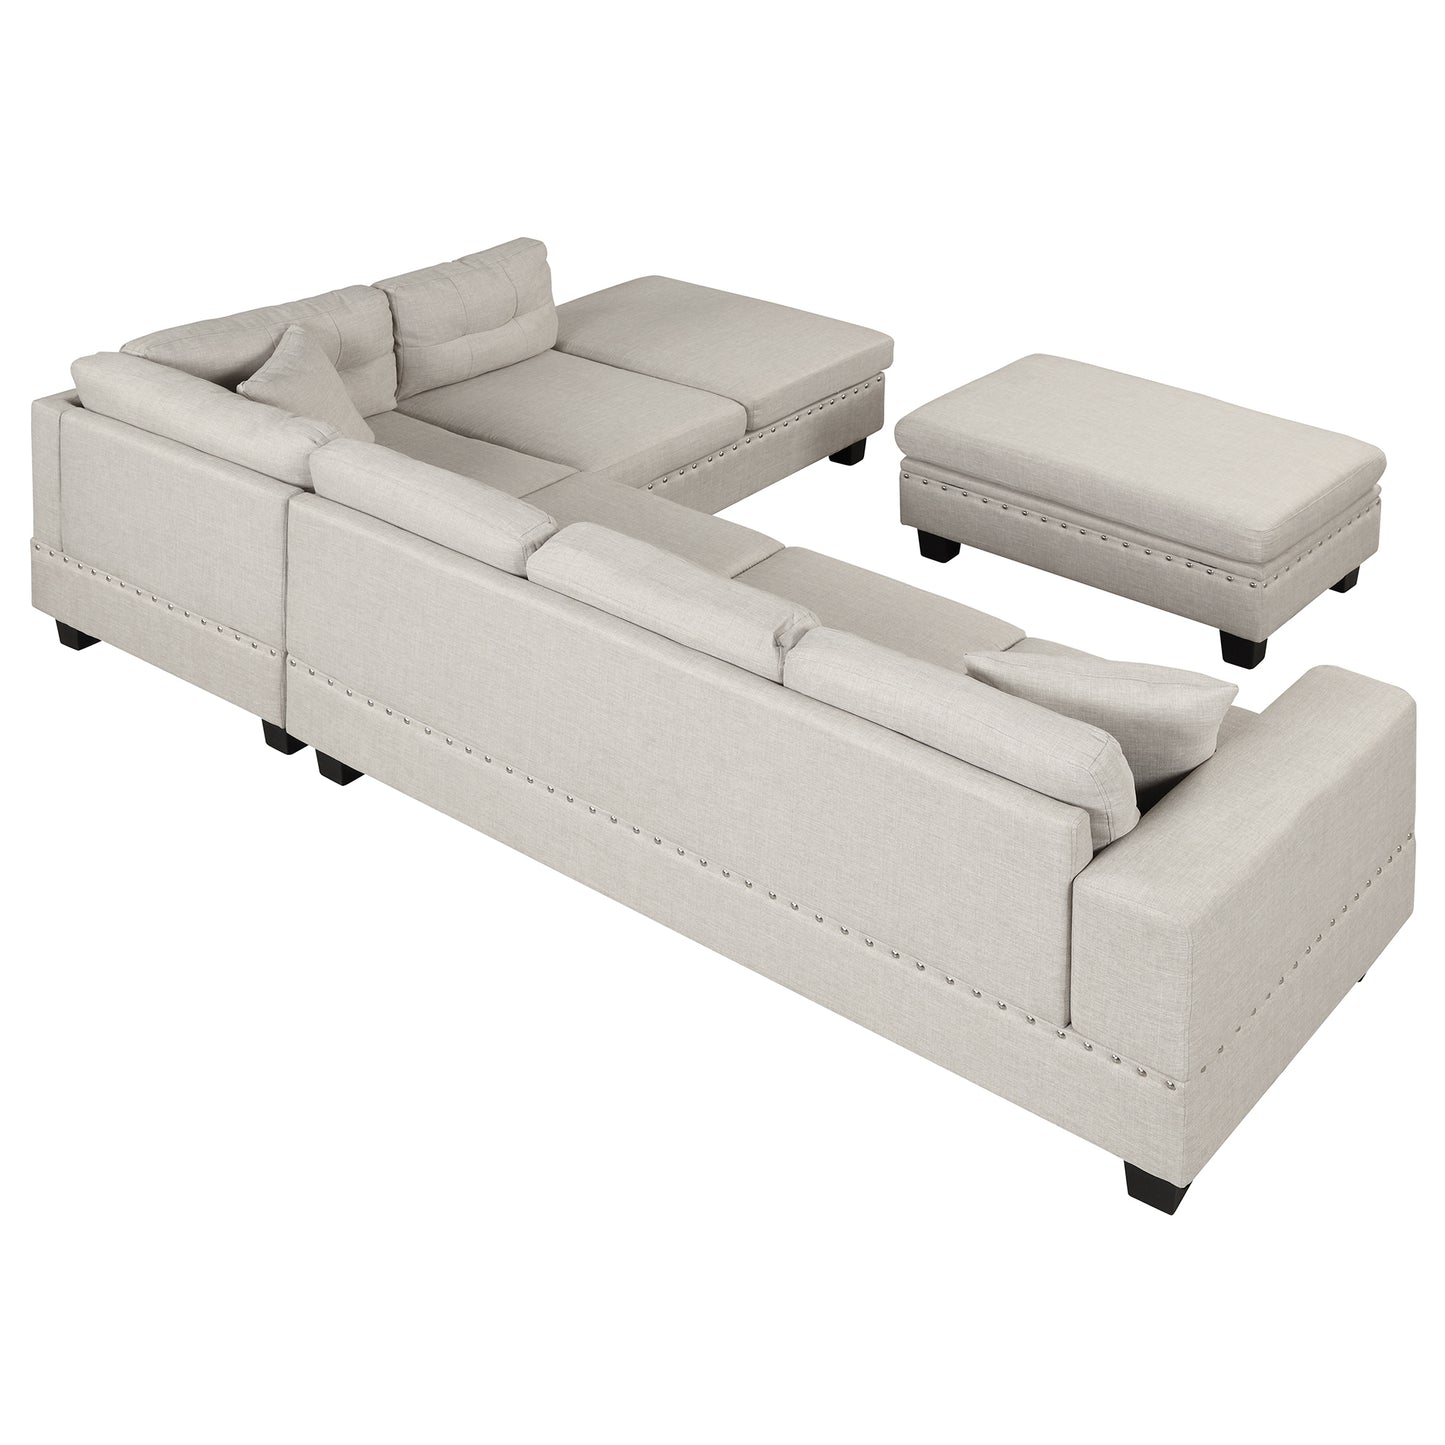 Modern Sectional Sofa with Storage Ottoman, L-Shape Couch with 2 Pillows and Cup Holder, Sectional Sofa with Reversible Chaise for Living Room, Light Gray